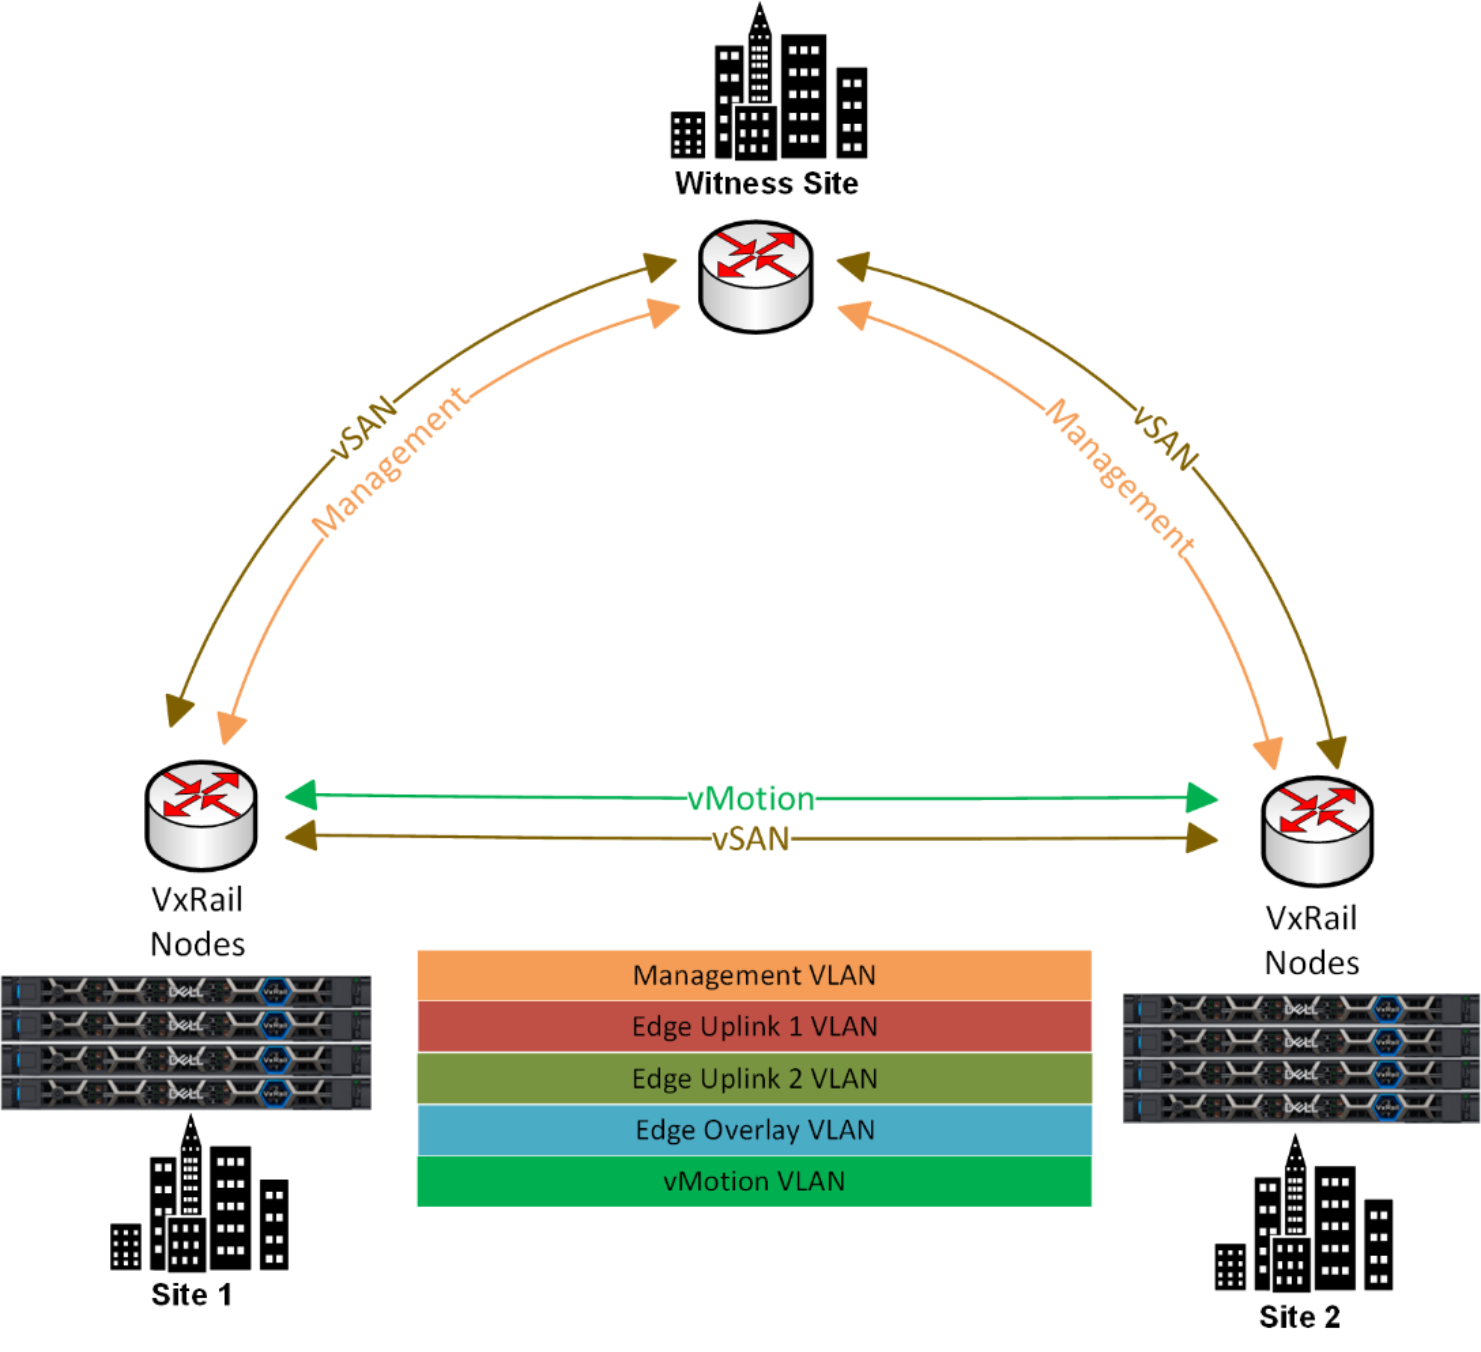 This figure shows how witnesses are mapped to VxRail stretched-cluster sites.